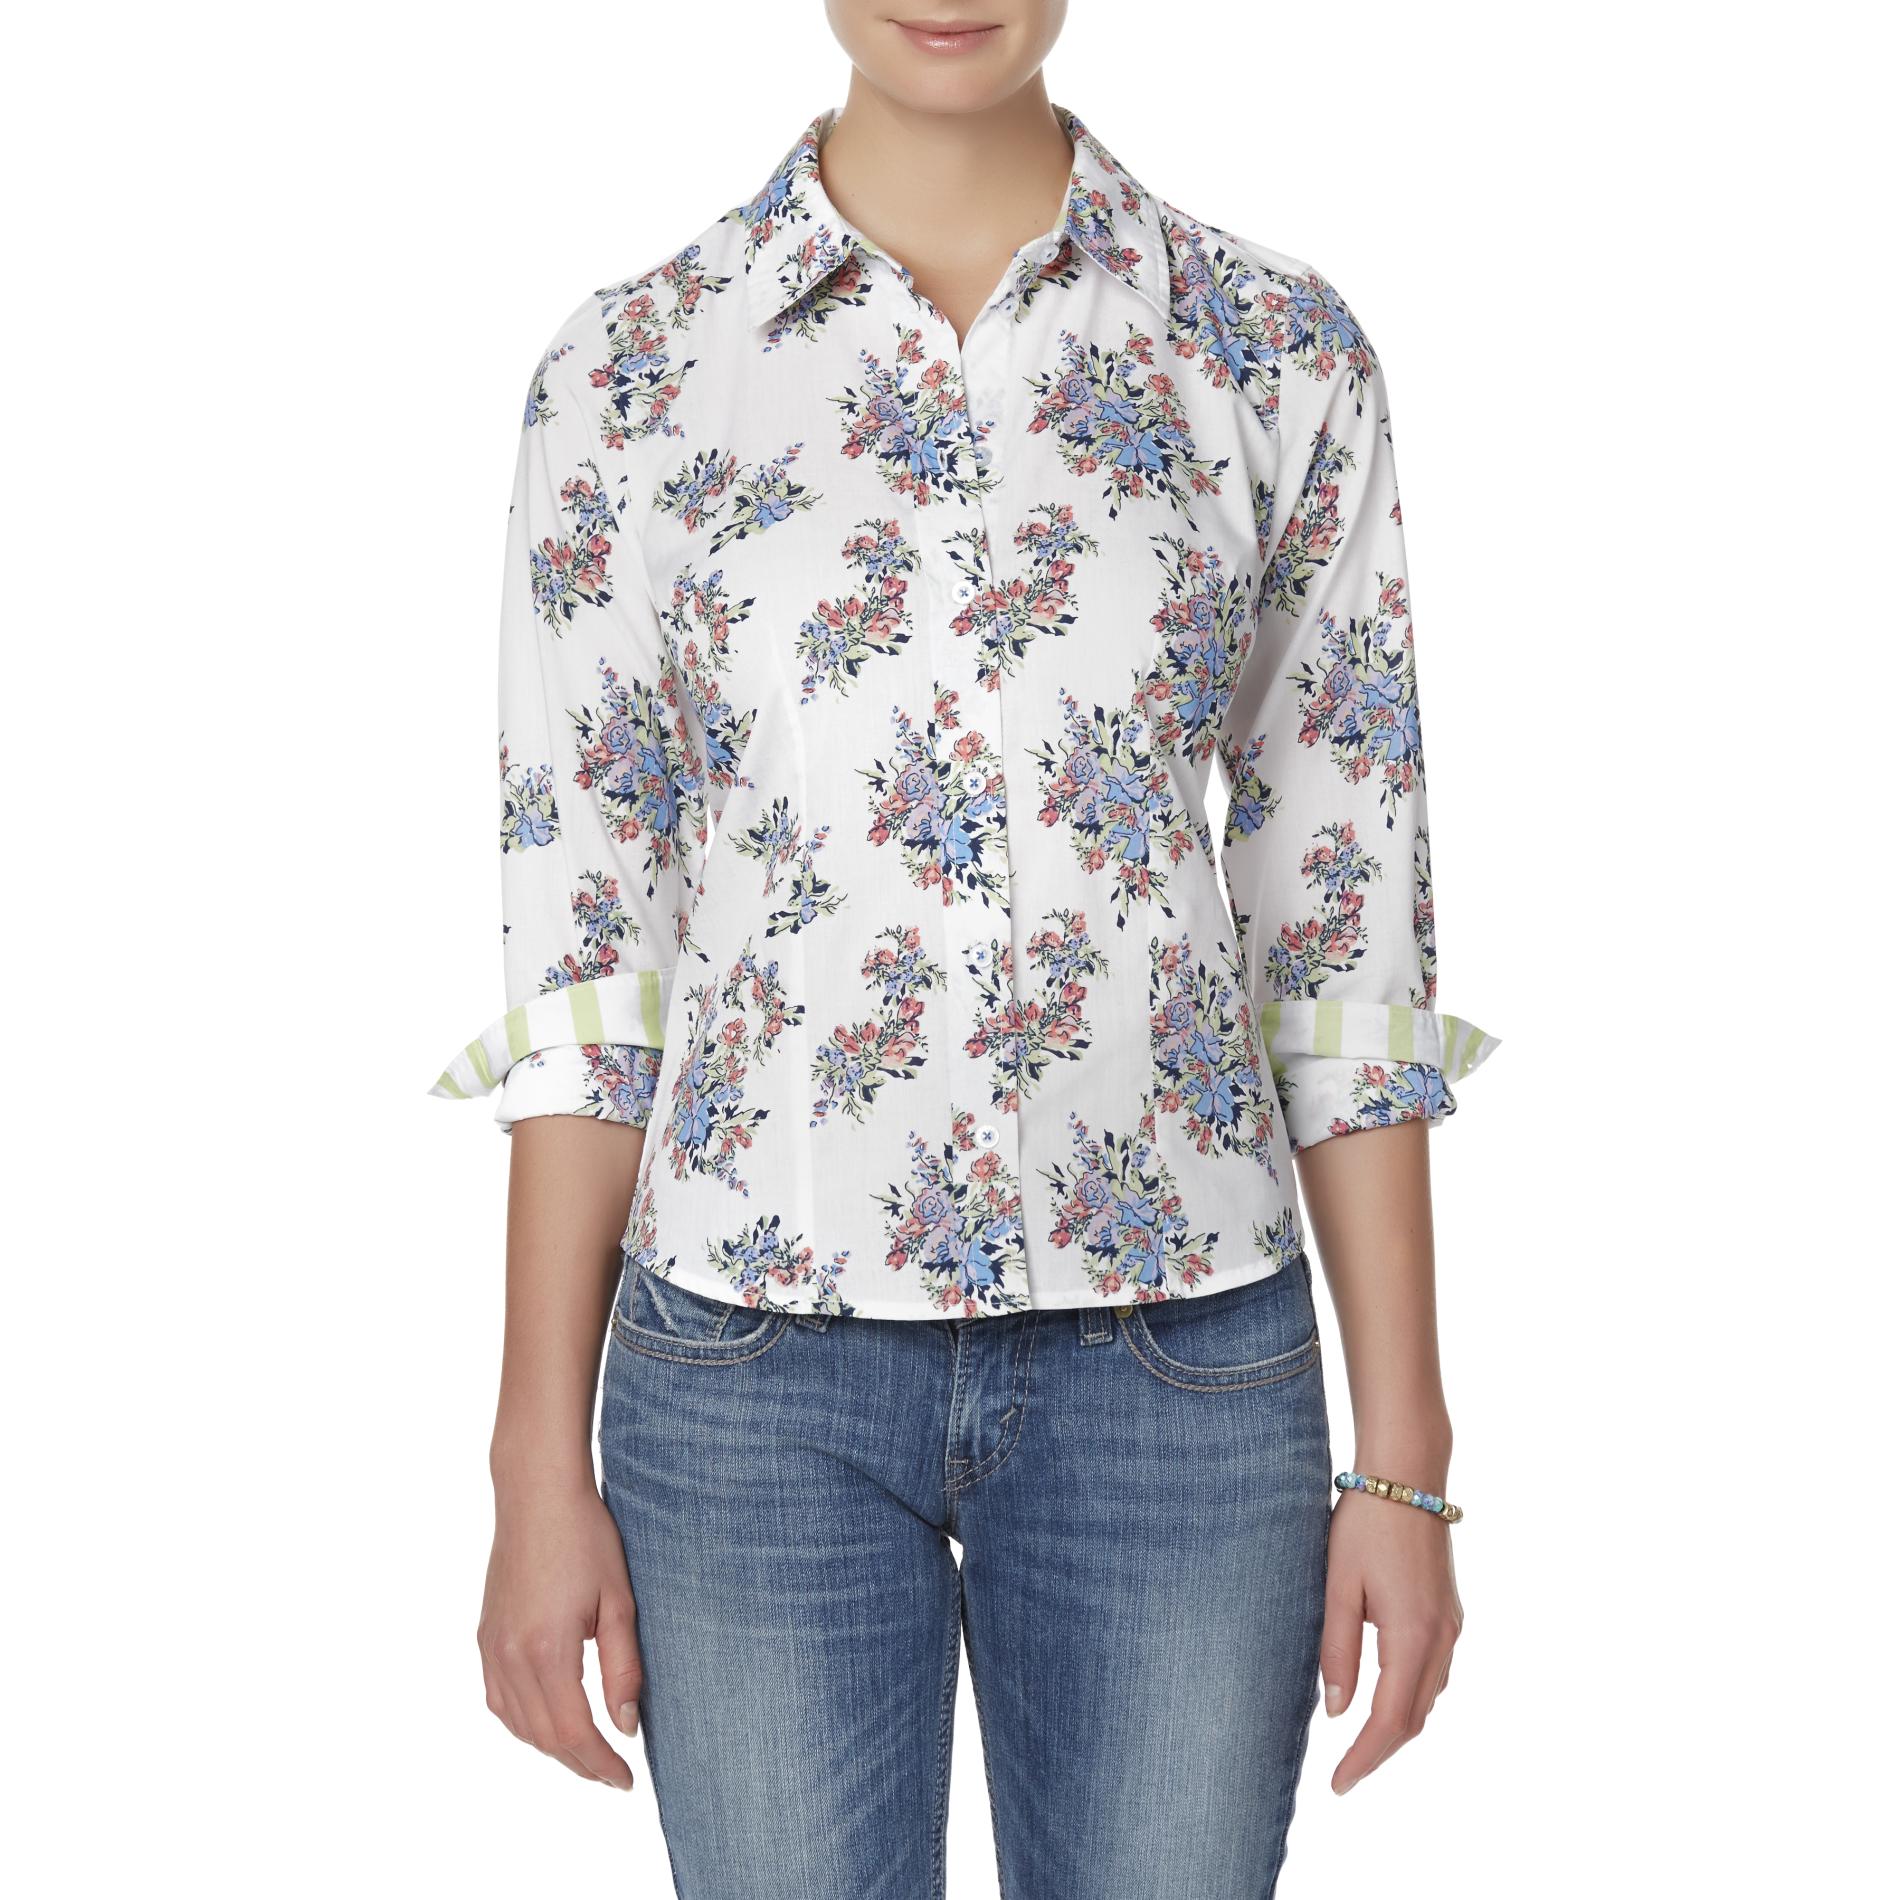 Basic Editions Women's Easy Care Shirt - Floral